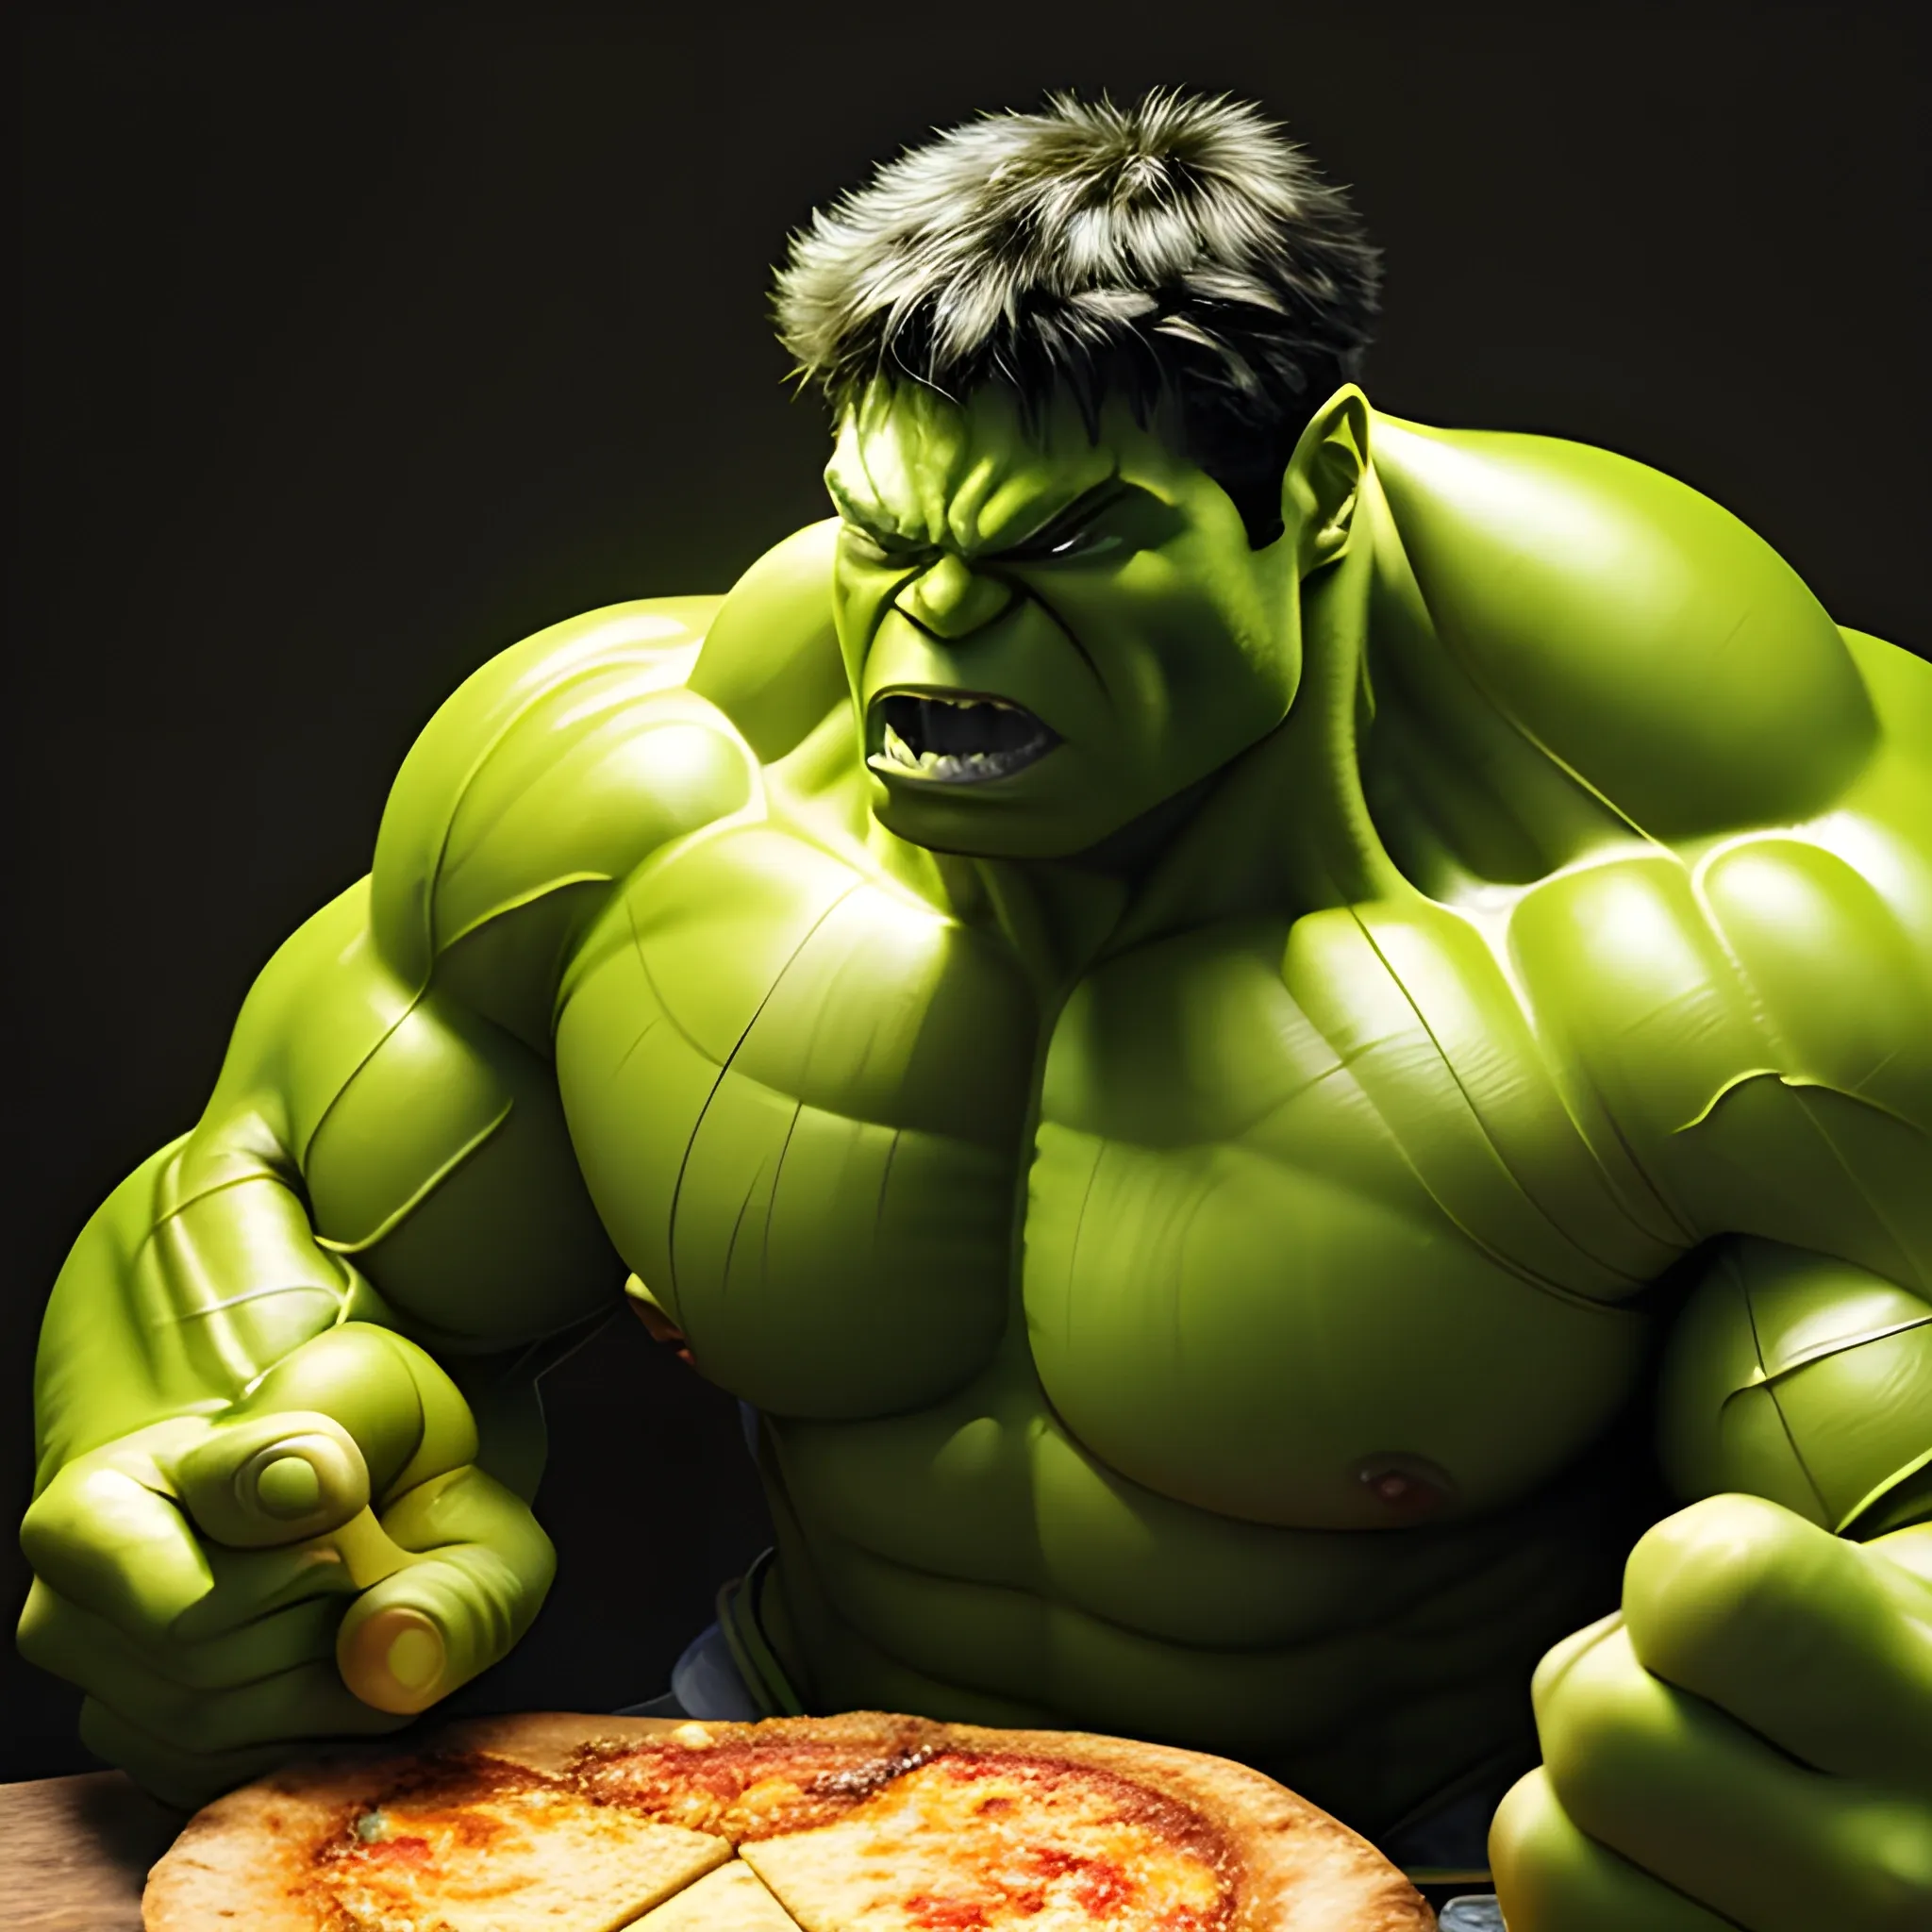 Depict the Hulk, unmistakably green and muscular, actively biting into a single slice of pizza with cheese dripping from it. The Hulk should have minor cybernetic enhancements but remain predominantly recognizable as the iconic Hulk. The scene should be hyper-realistic, with soft studio lighting and edge highlights. The background should evoke a luxurious cyberpunk ambiance. The final image should be in 4k resolution